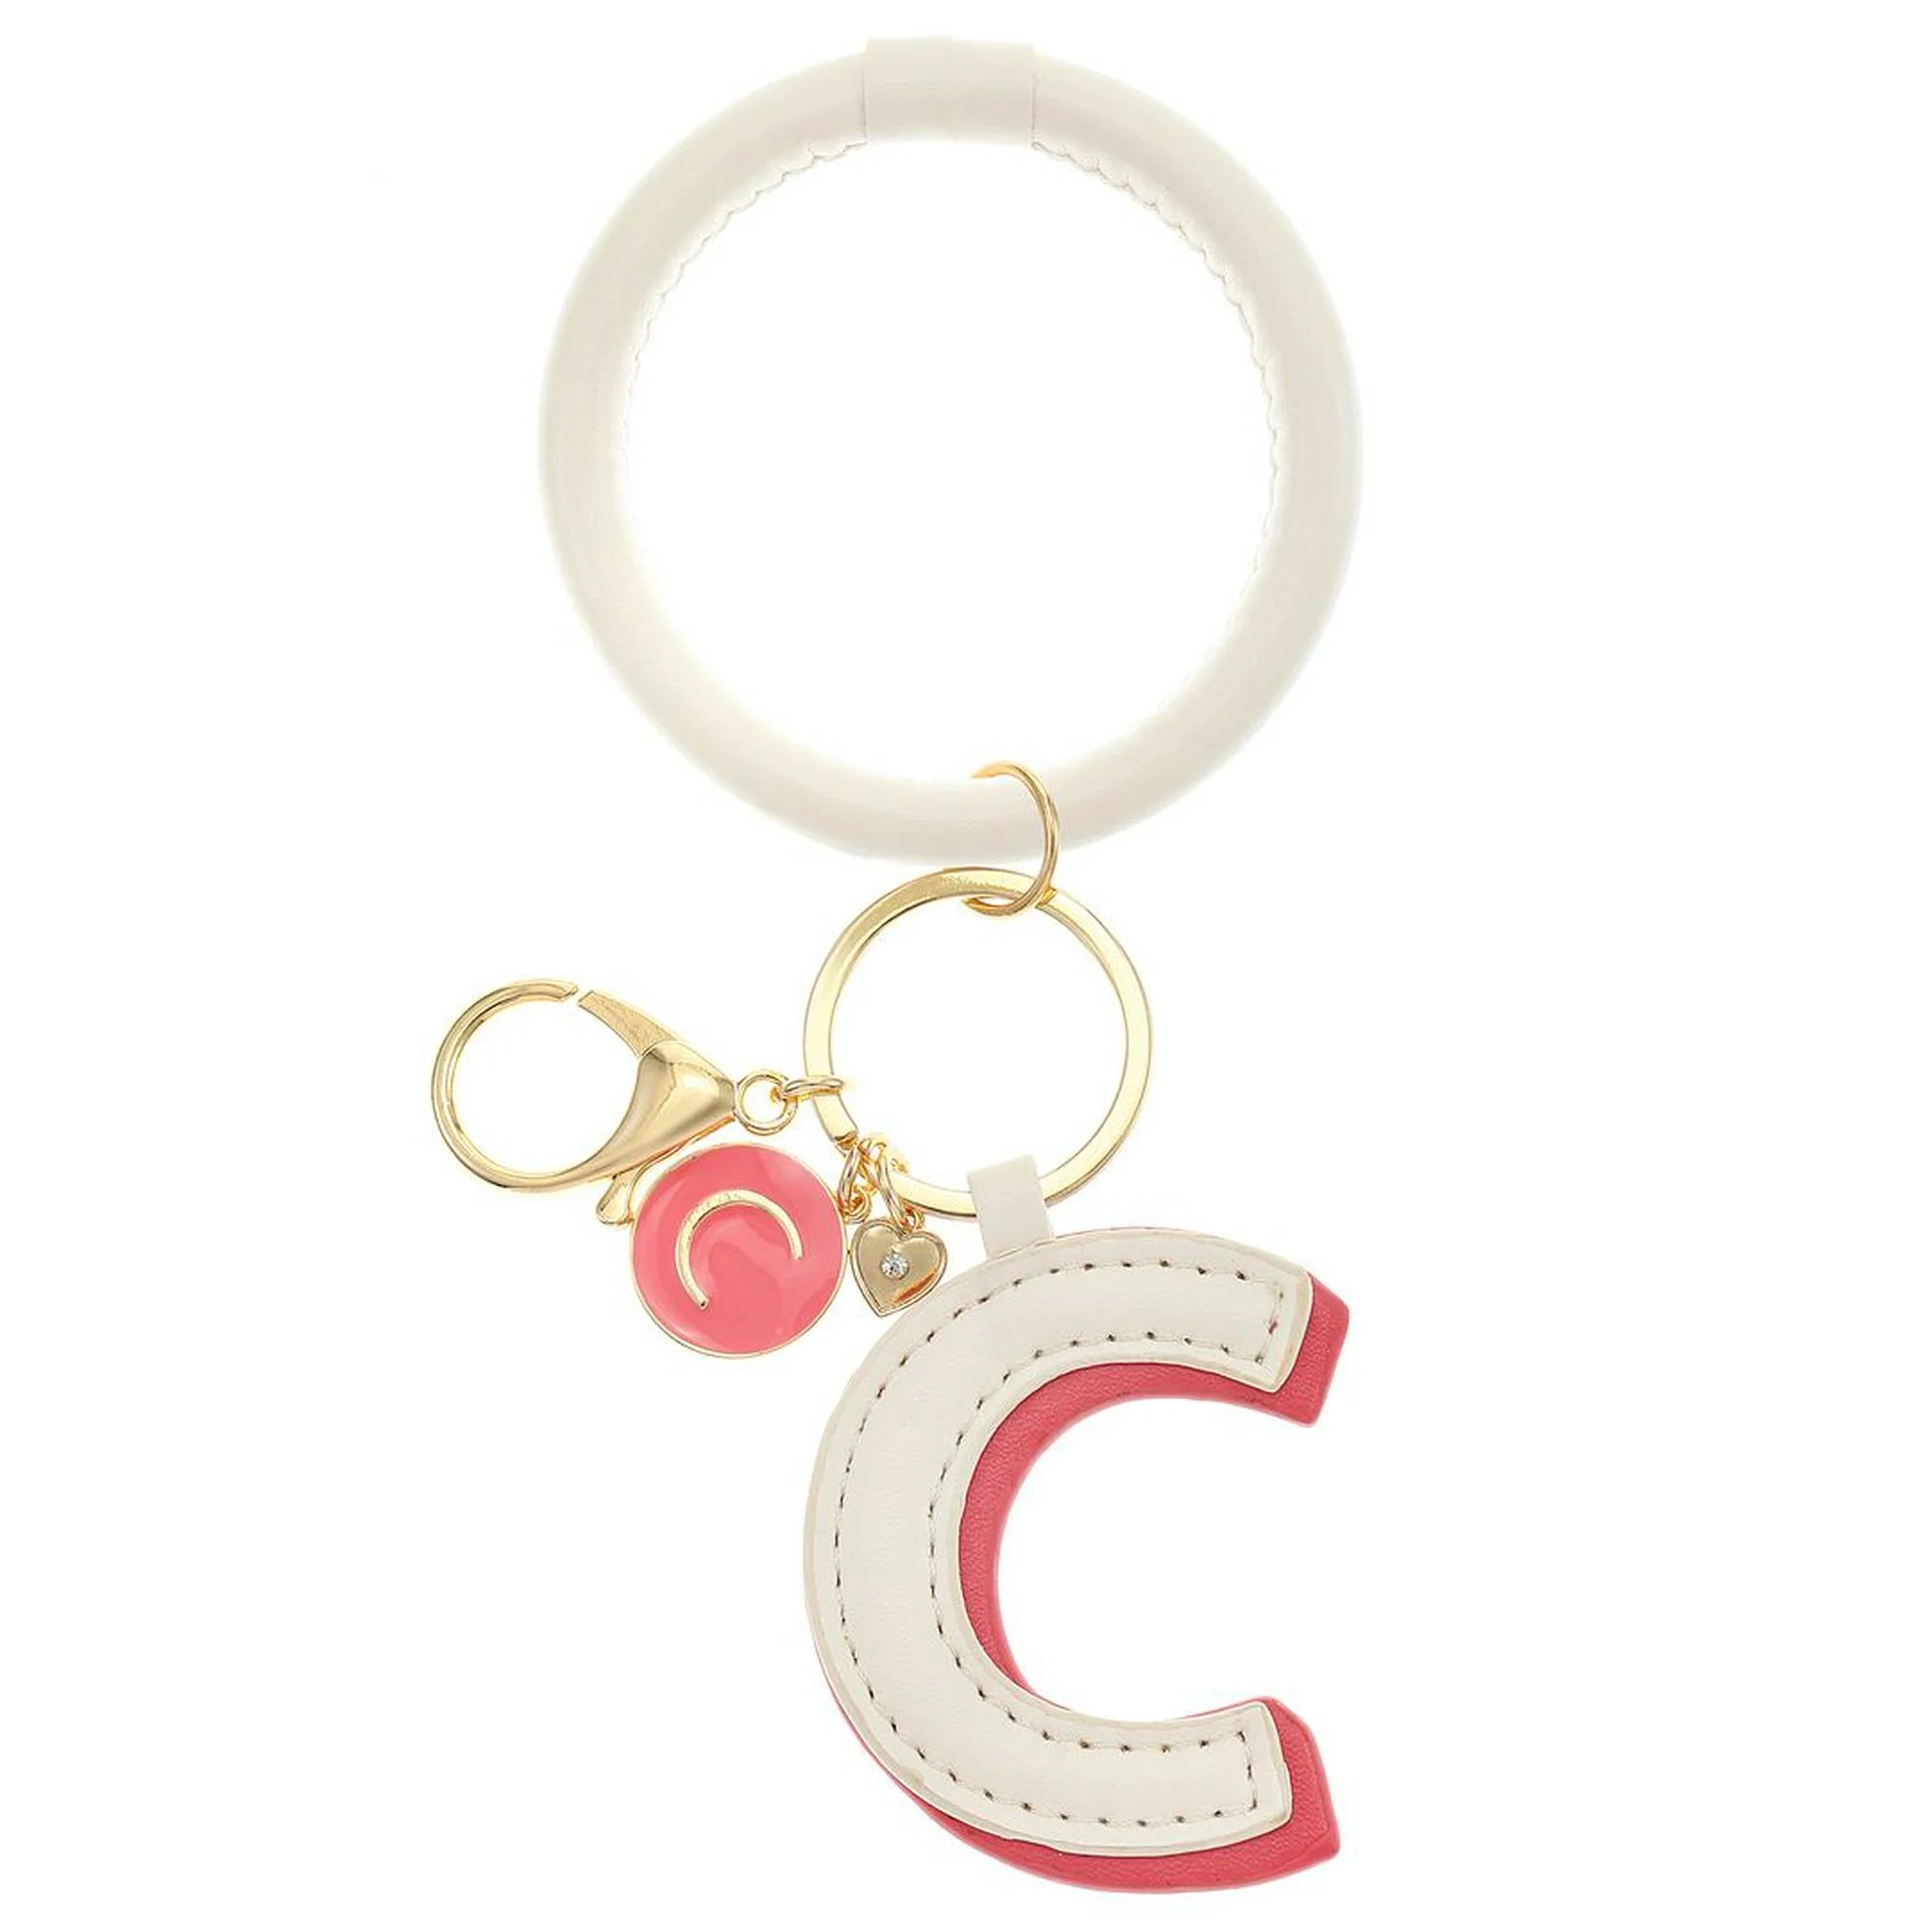 Time and Tru Simulated Leather Initial Letter Adjustable Bangle Bracelet with Goldtone Key Ring | Walmart (US)